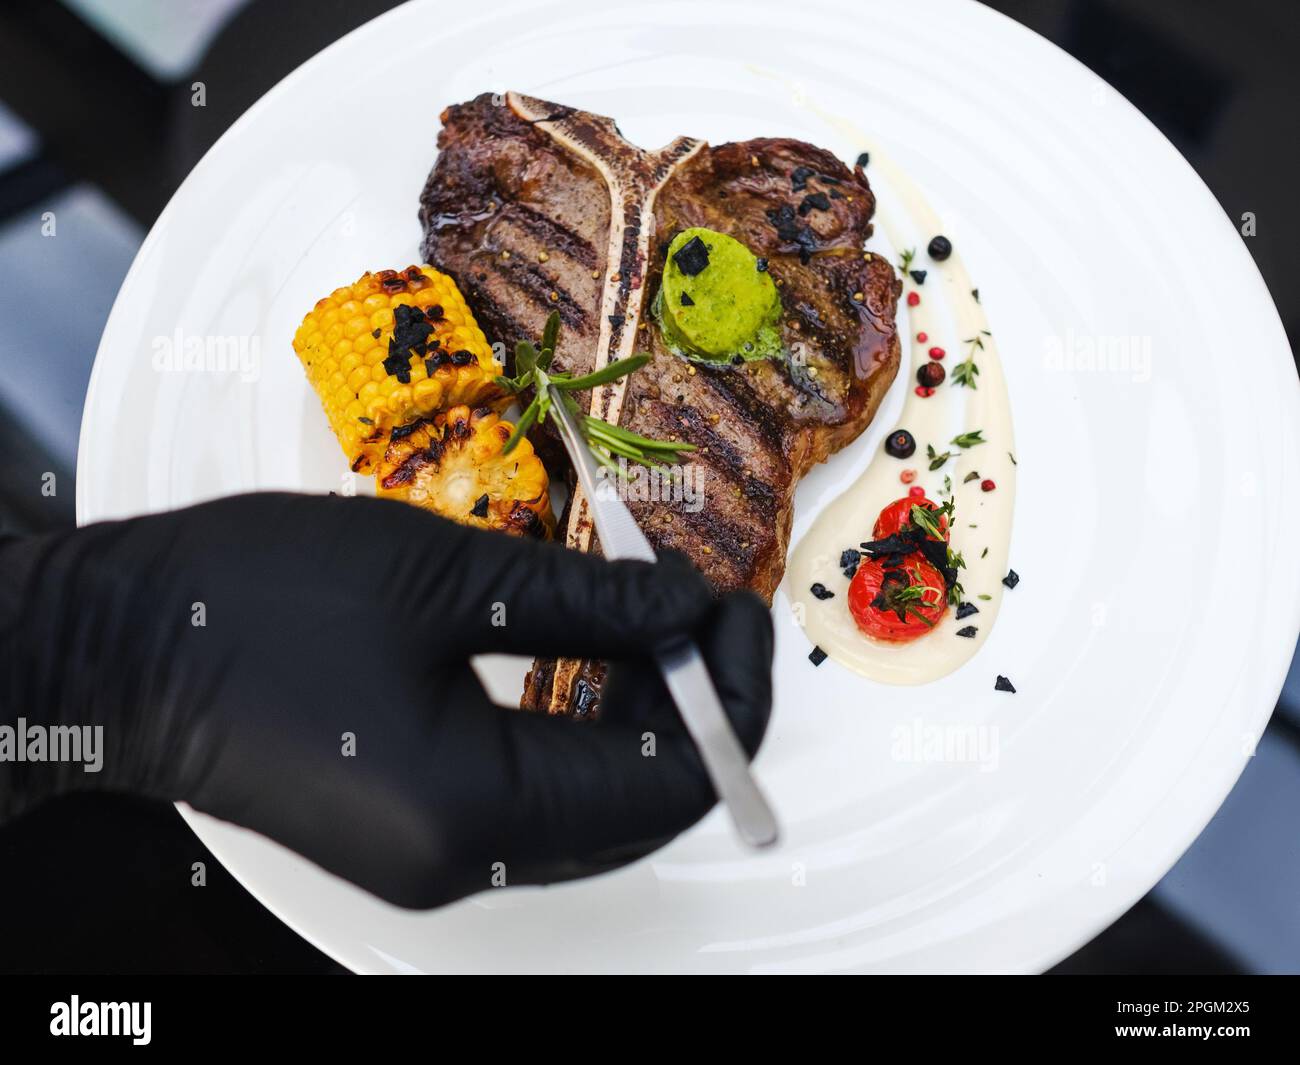 food stylist work decorating meal culinary art Stock Photo